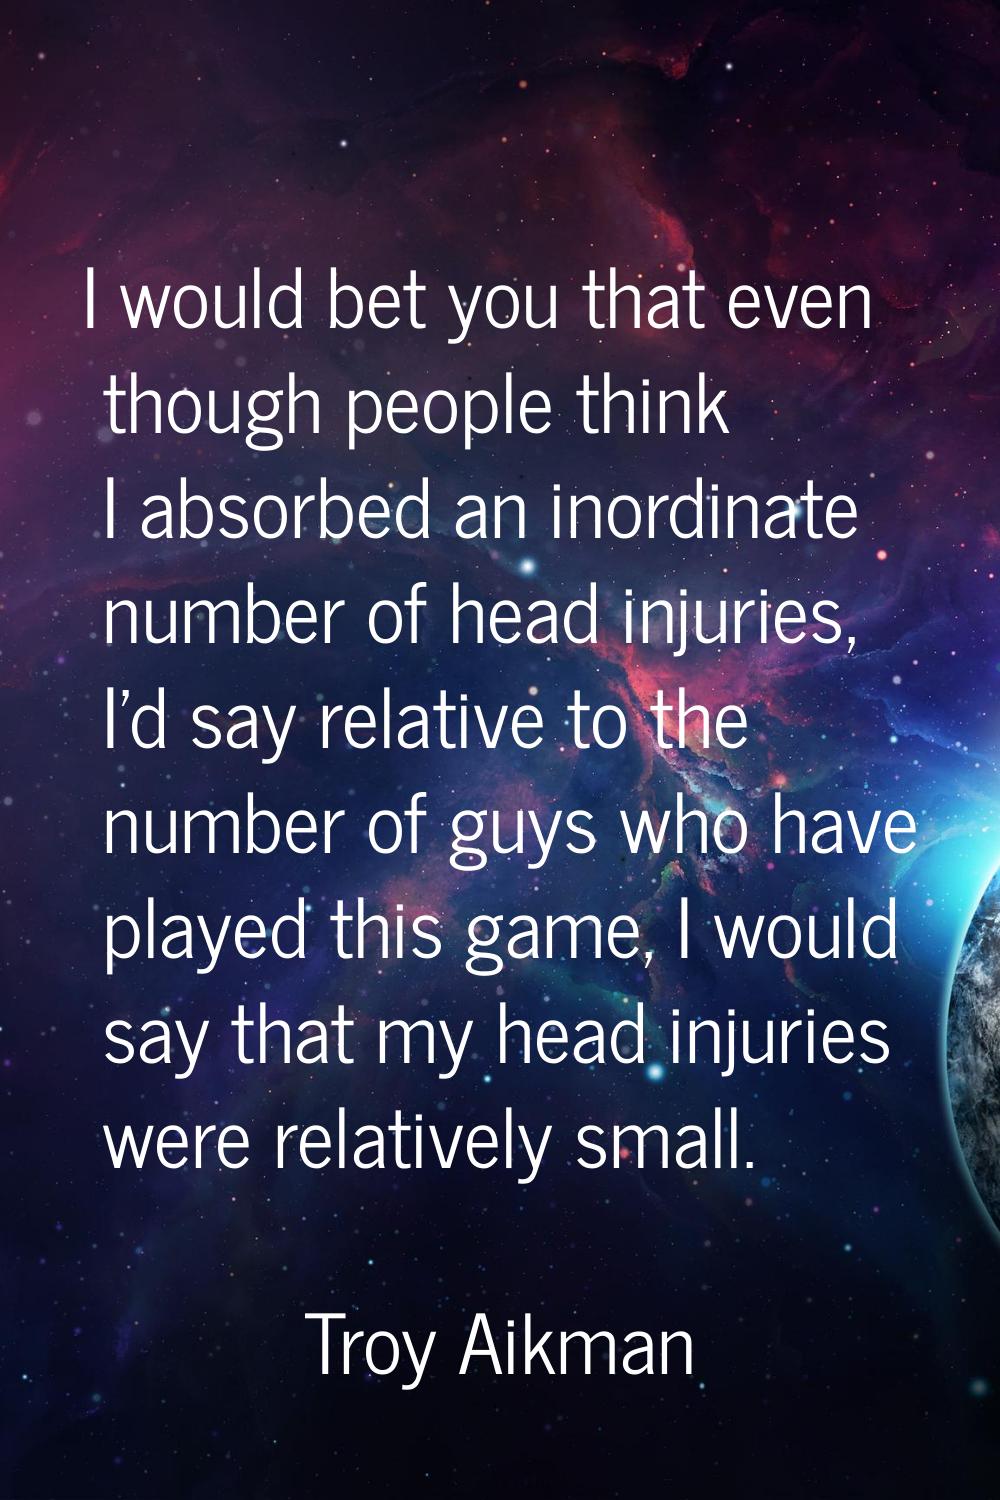 I would bet you that even though people think I absorbed an inordinate number of head injuries, I'd